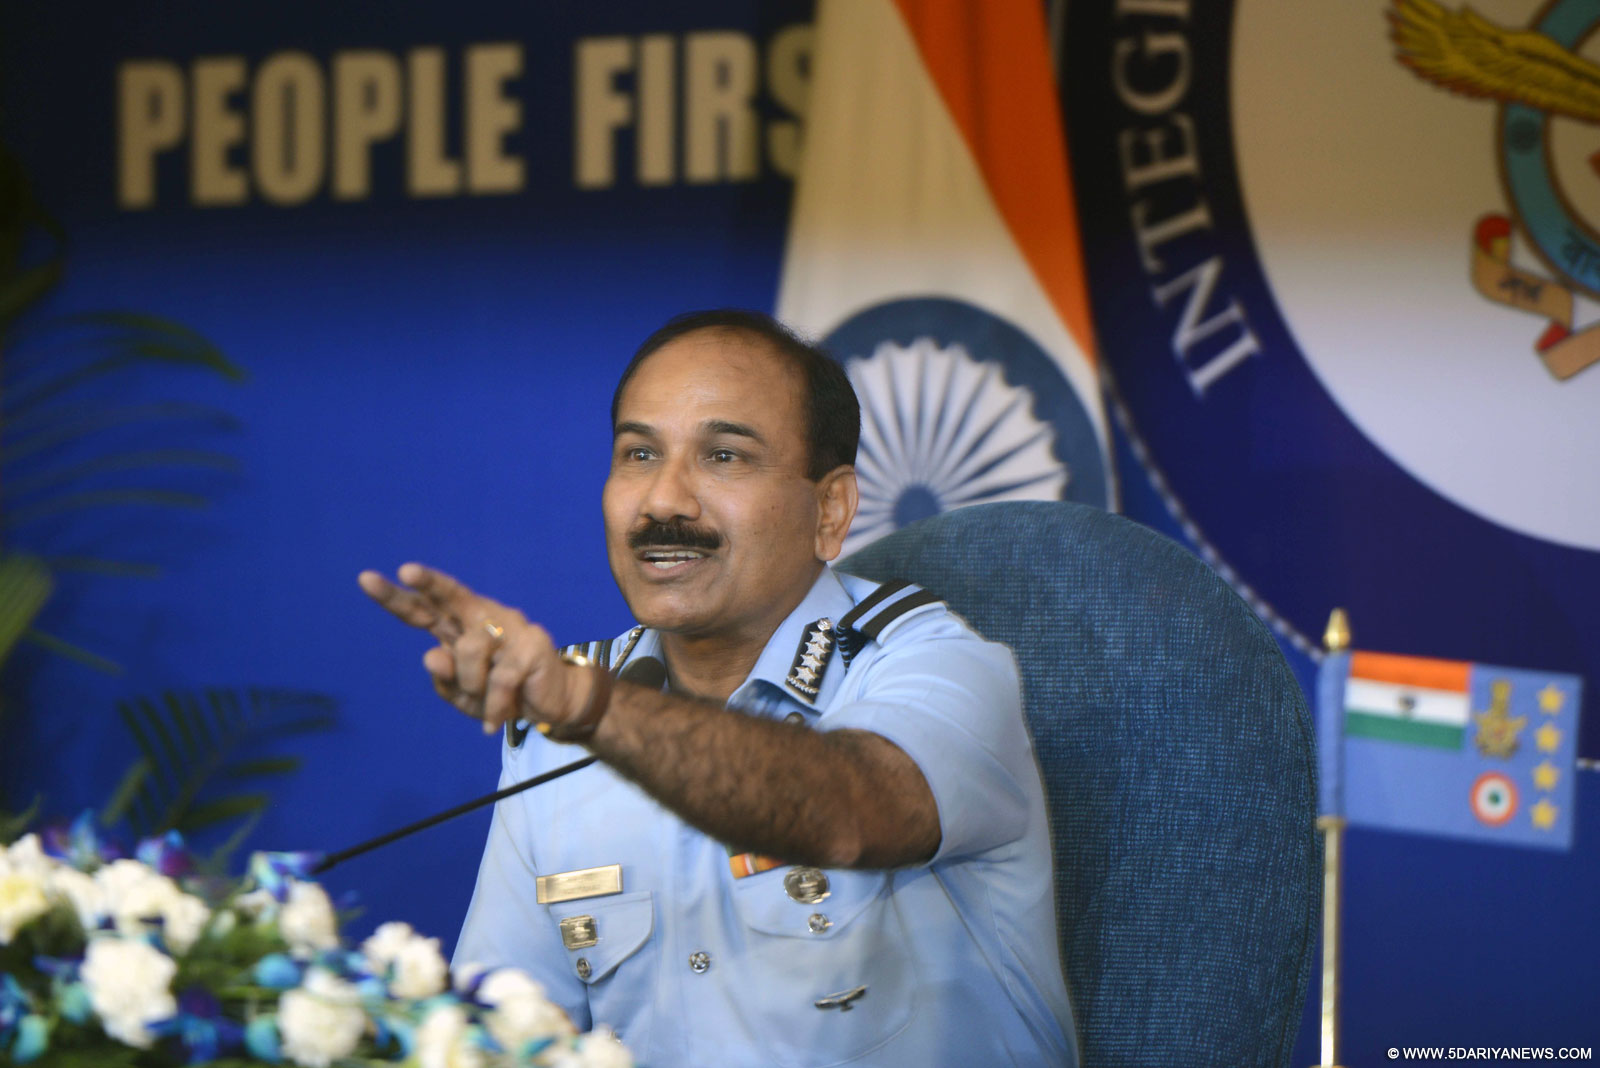 The Chief of the Air Staff, Air Chief Marshal Arup Raha addresses during a press conference in New Delhi on Oct 3, 2015.